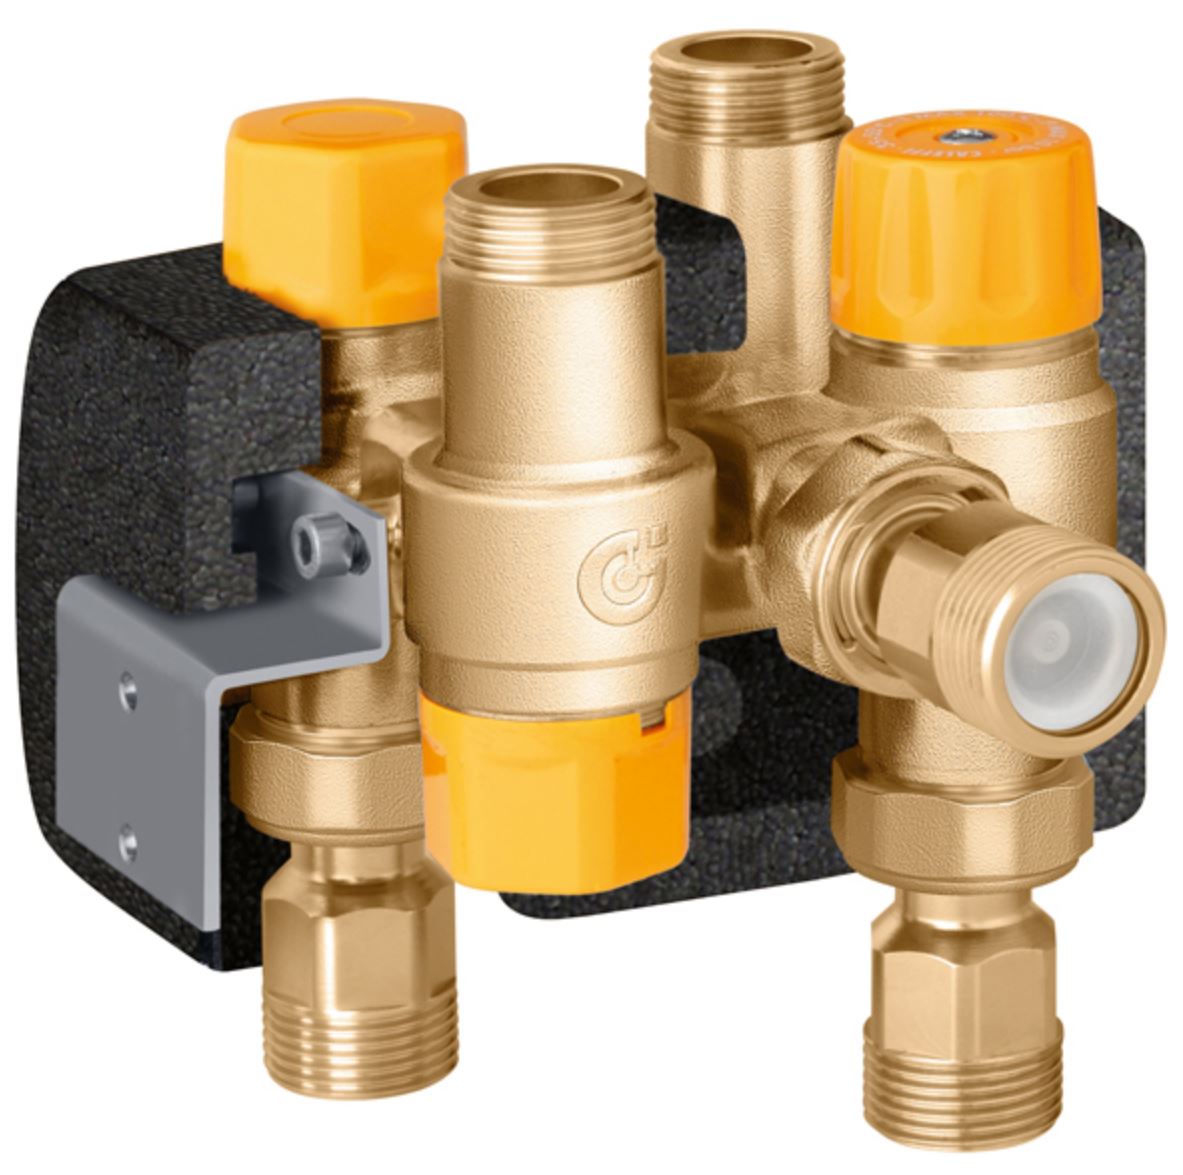 Solar rated valves & spares